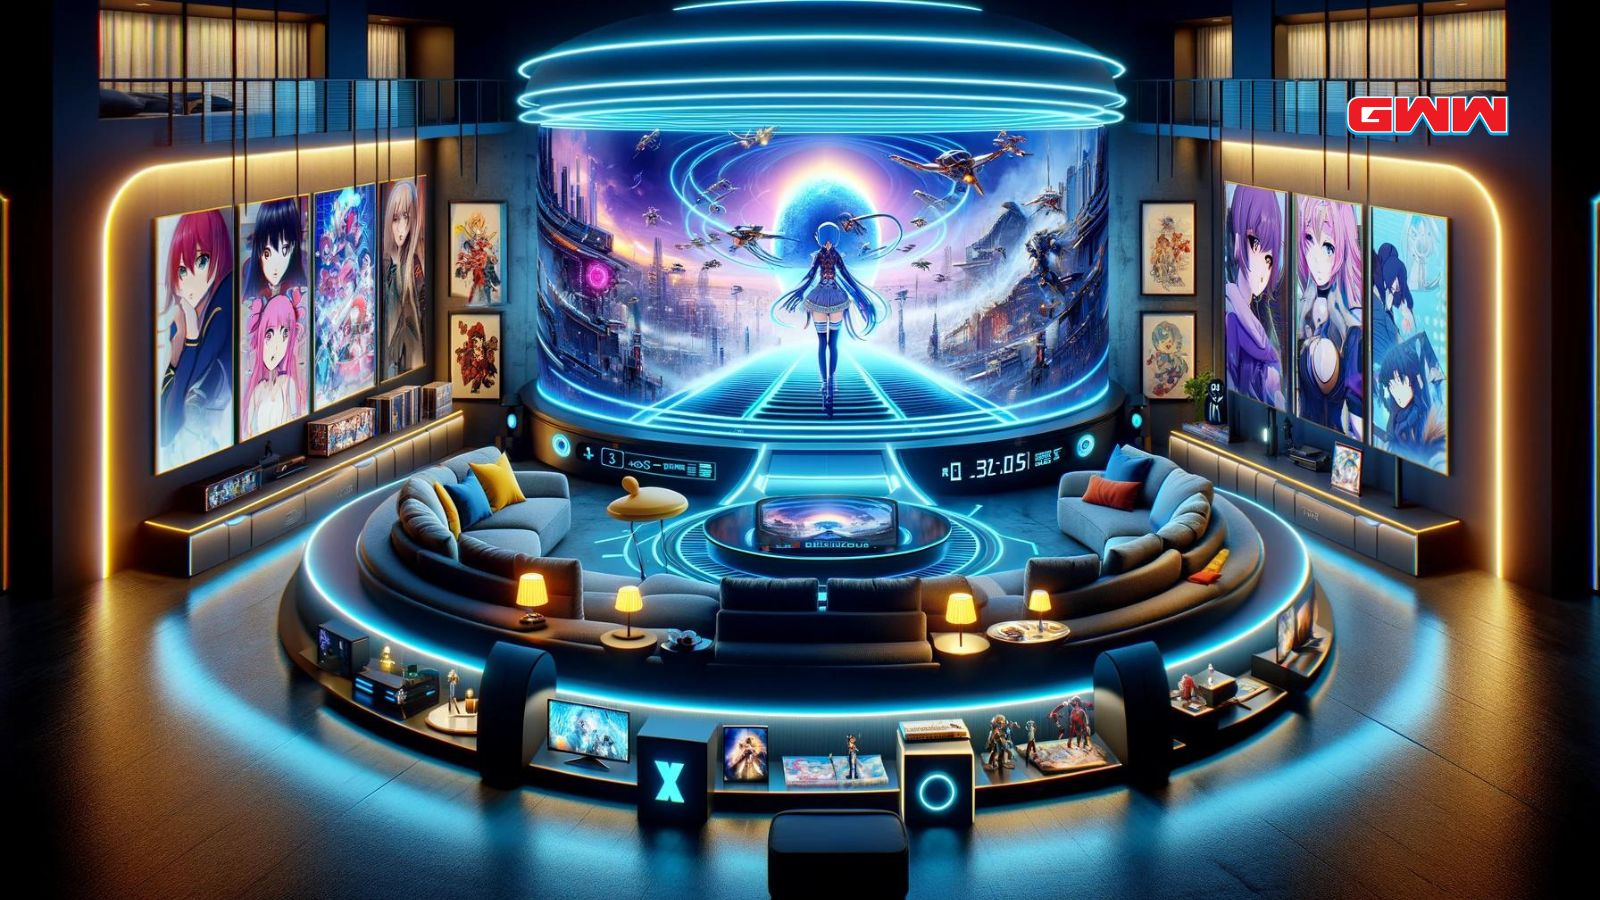 Futuristic anime-themed living room with curved display